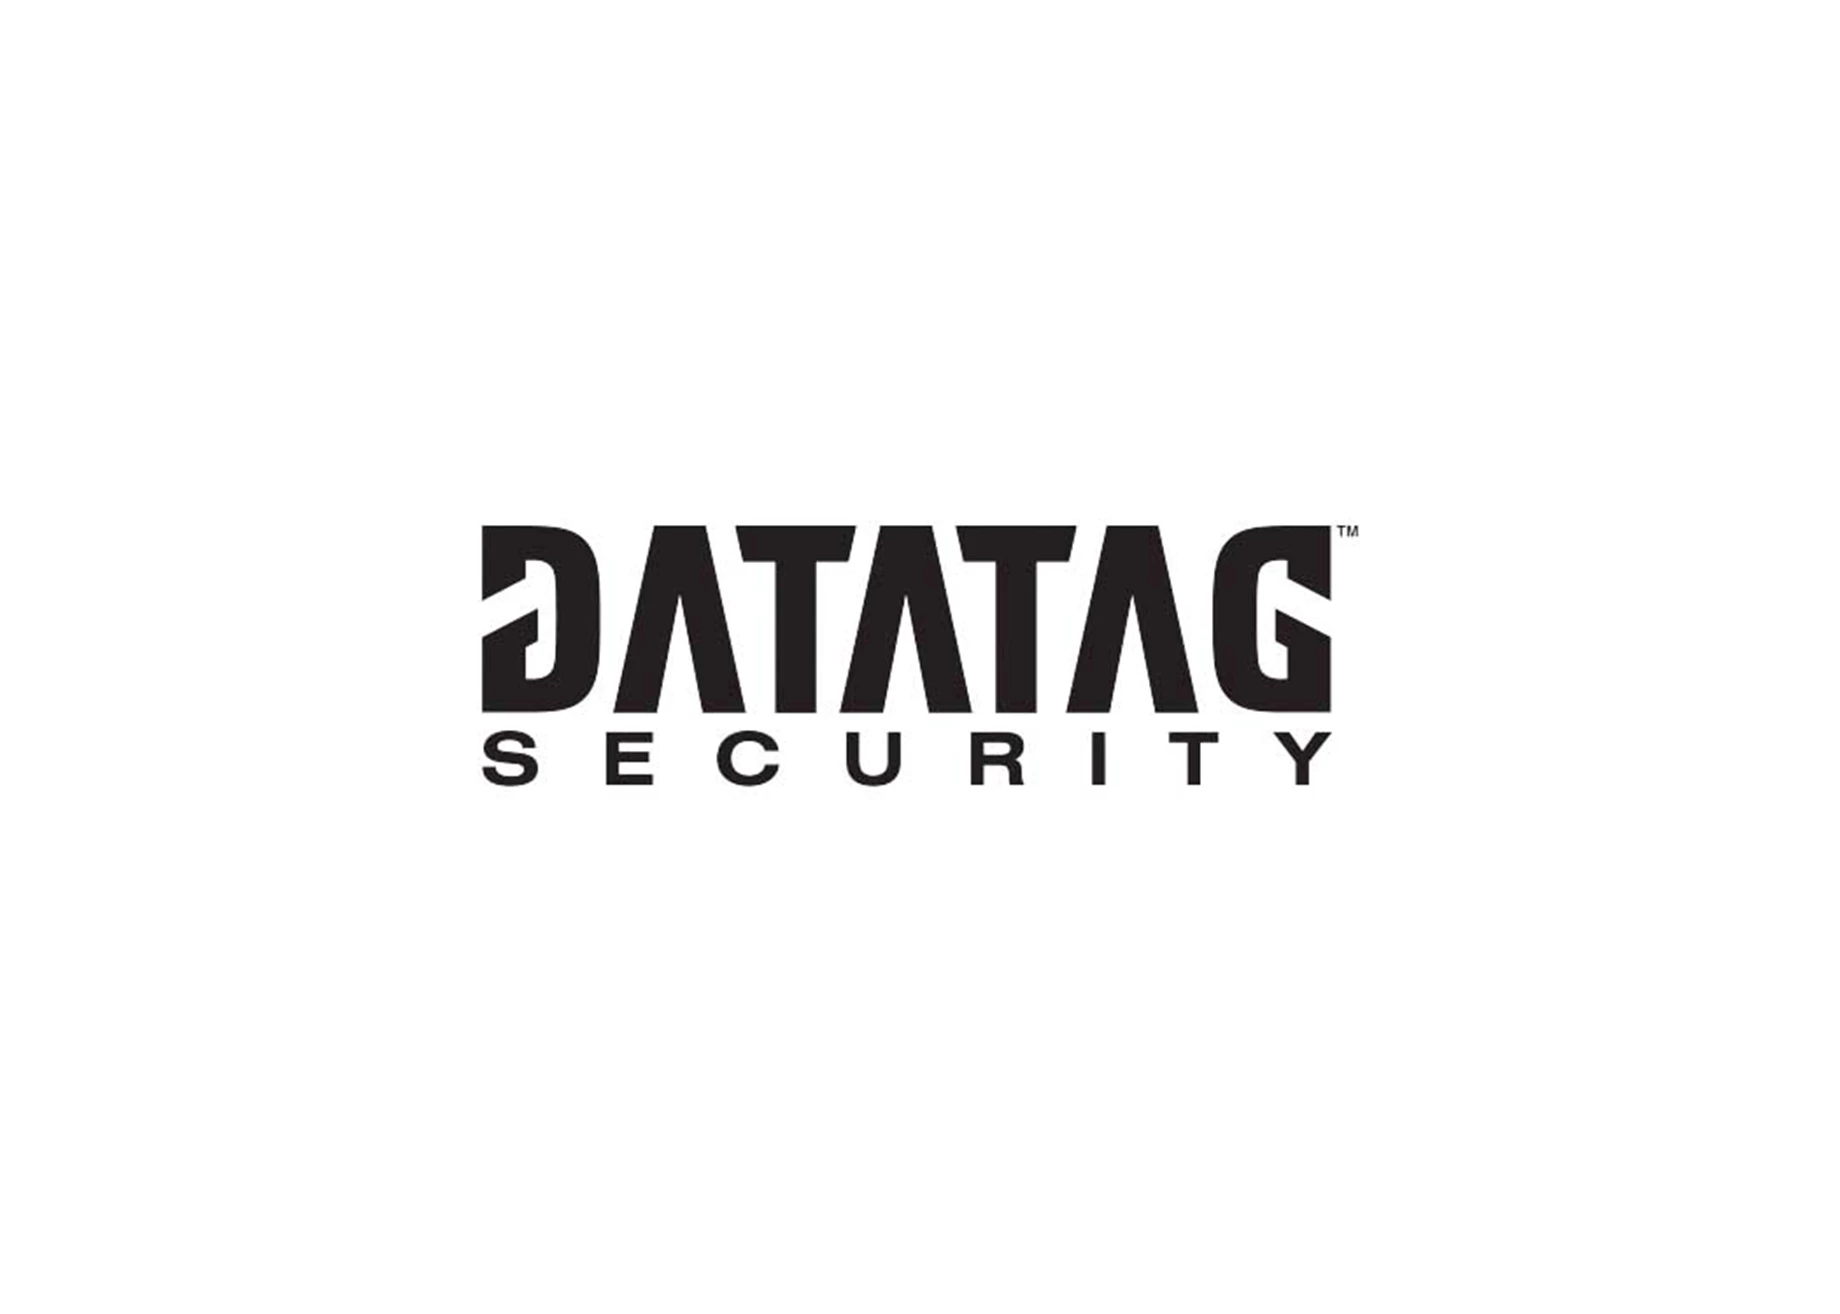 The Datatag Security logo.